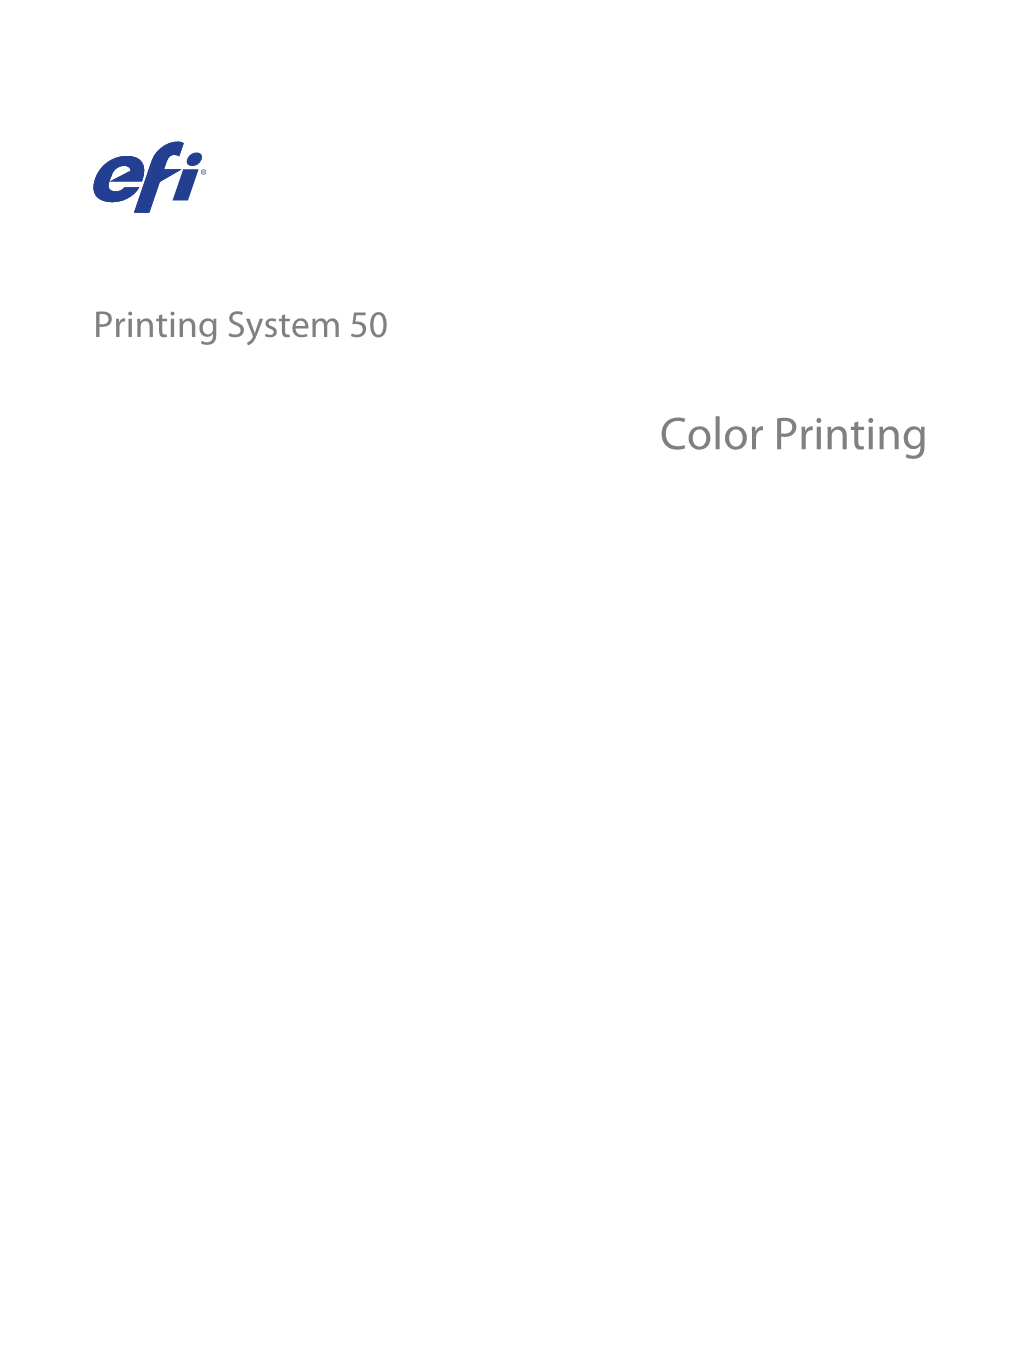 Color Printing © 2018 Electronics for Imaging, Inc